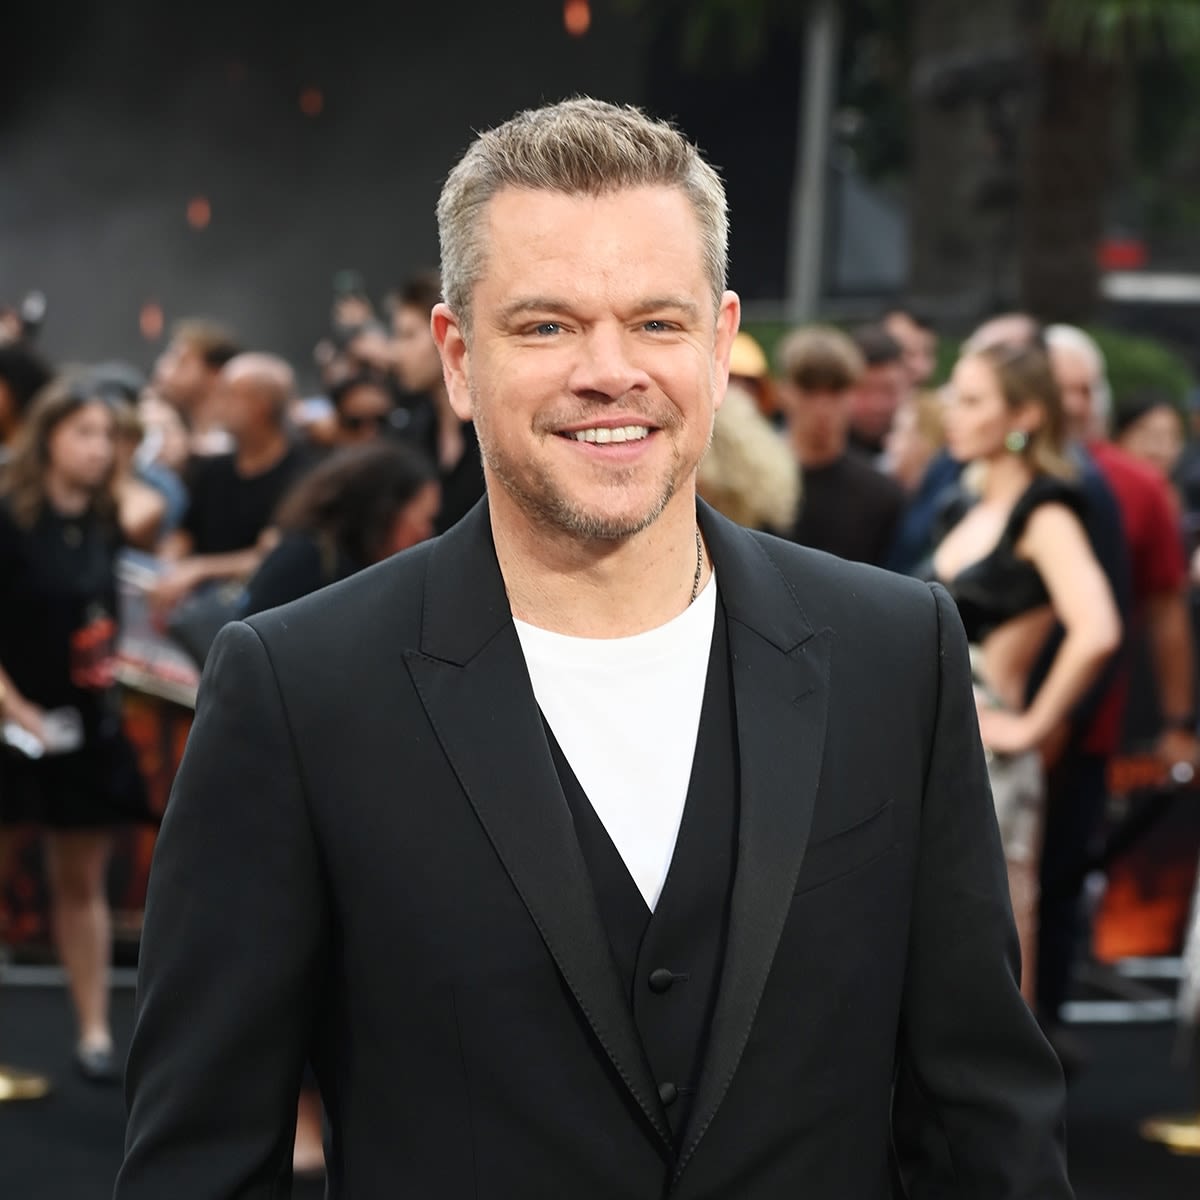 Matt Damon Details "Surreal" Experience of Daughter Heading to College